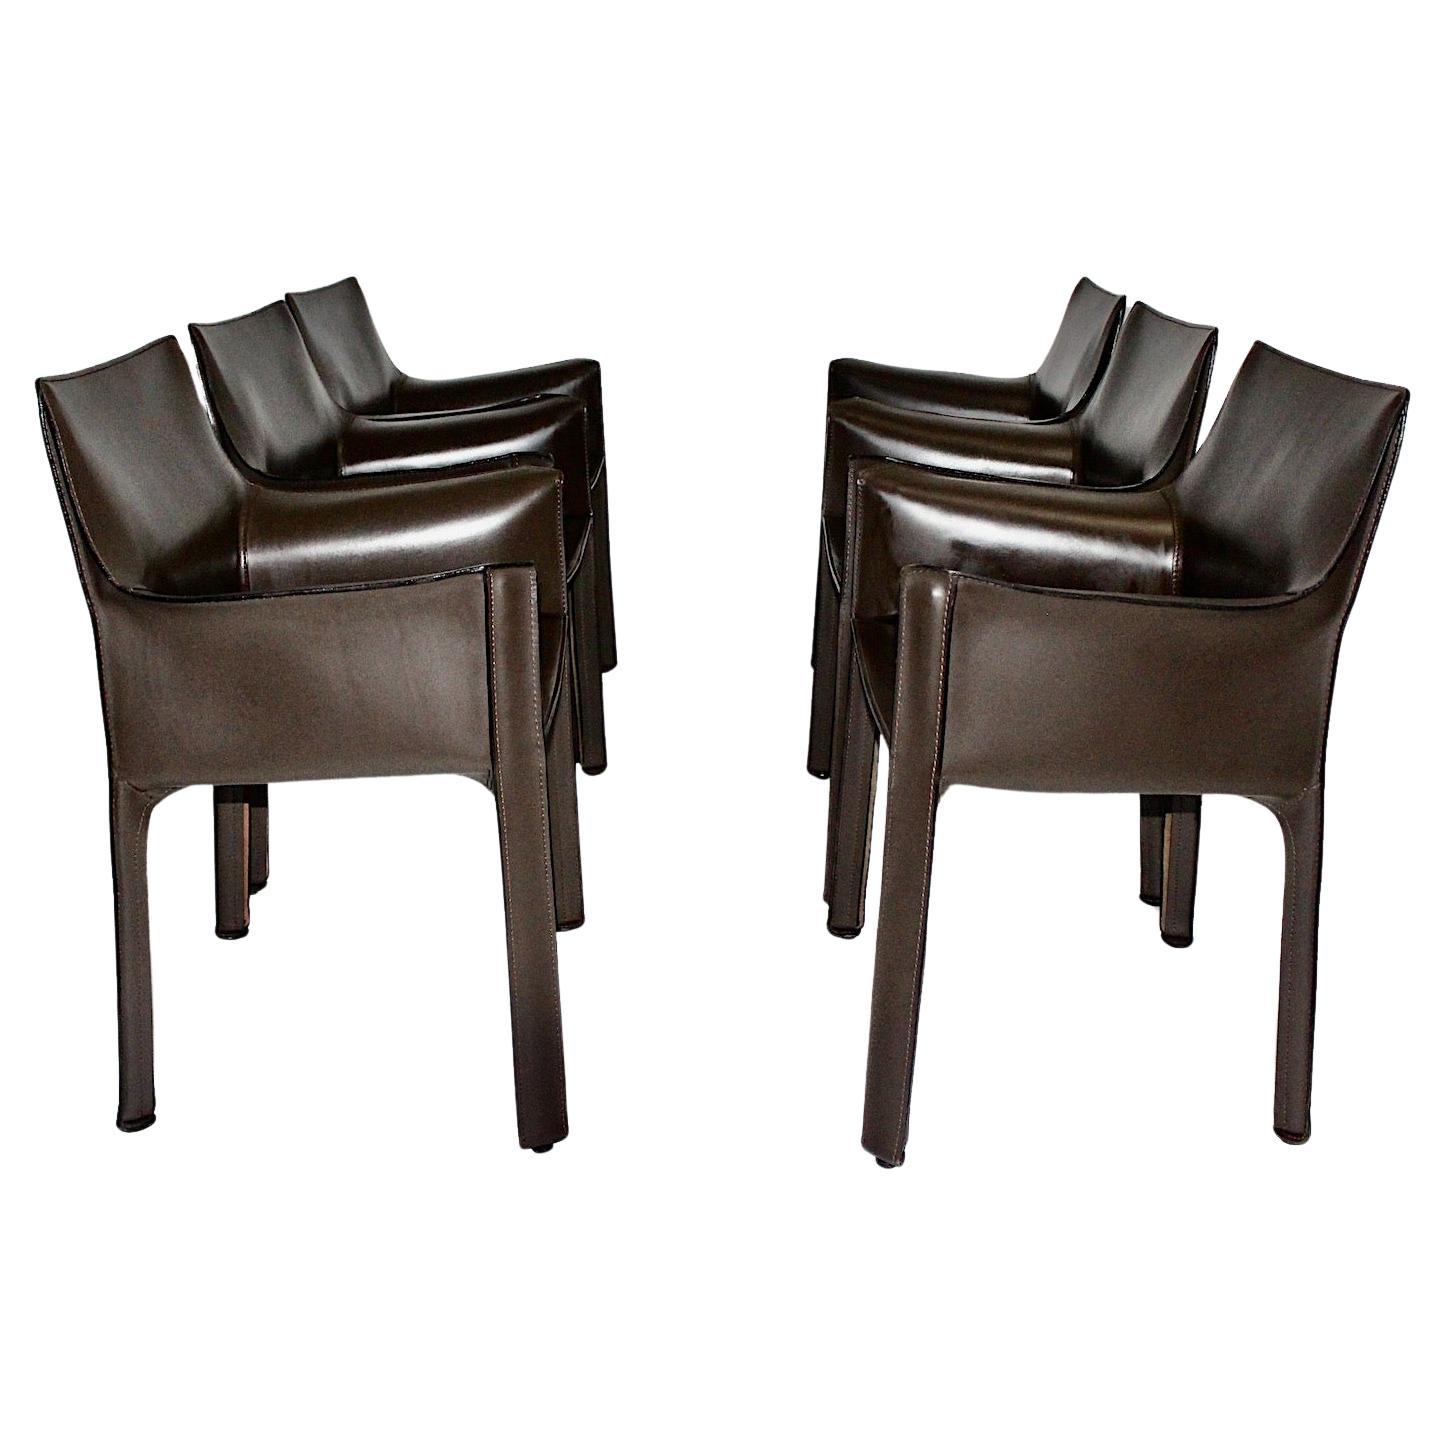 Mario Bellini Vintage Chocolate Brown Leather Dining Chairs Cassina 1970s Italy